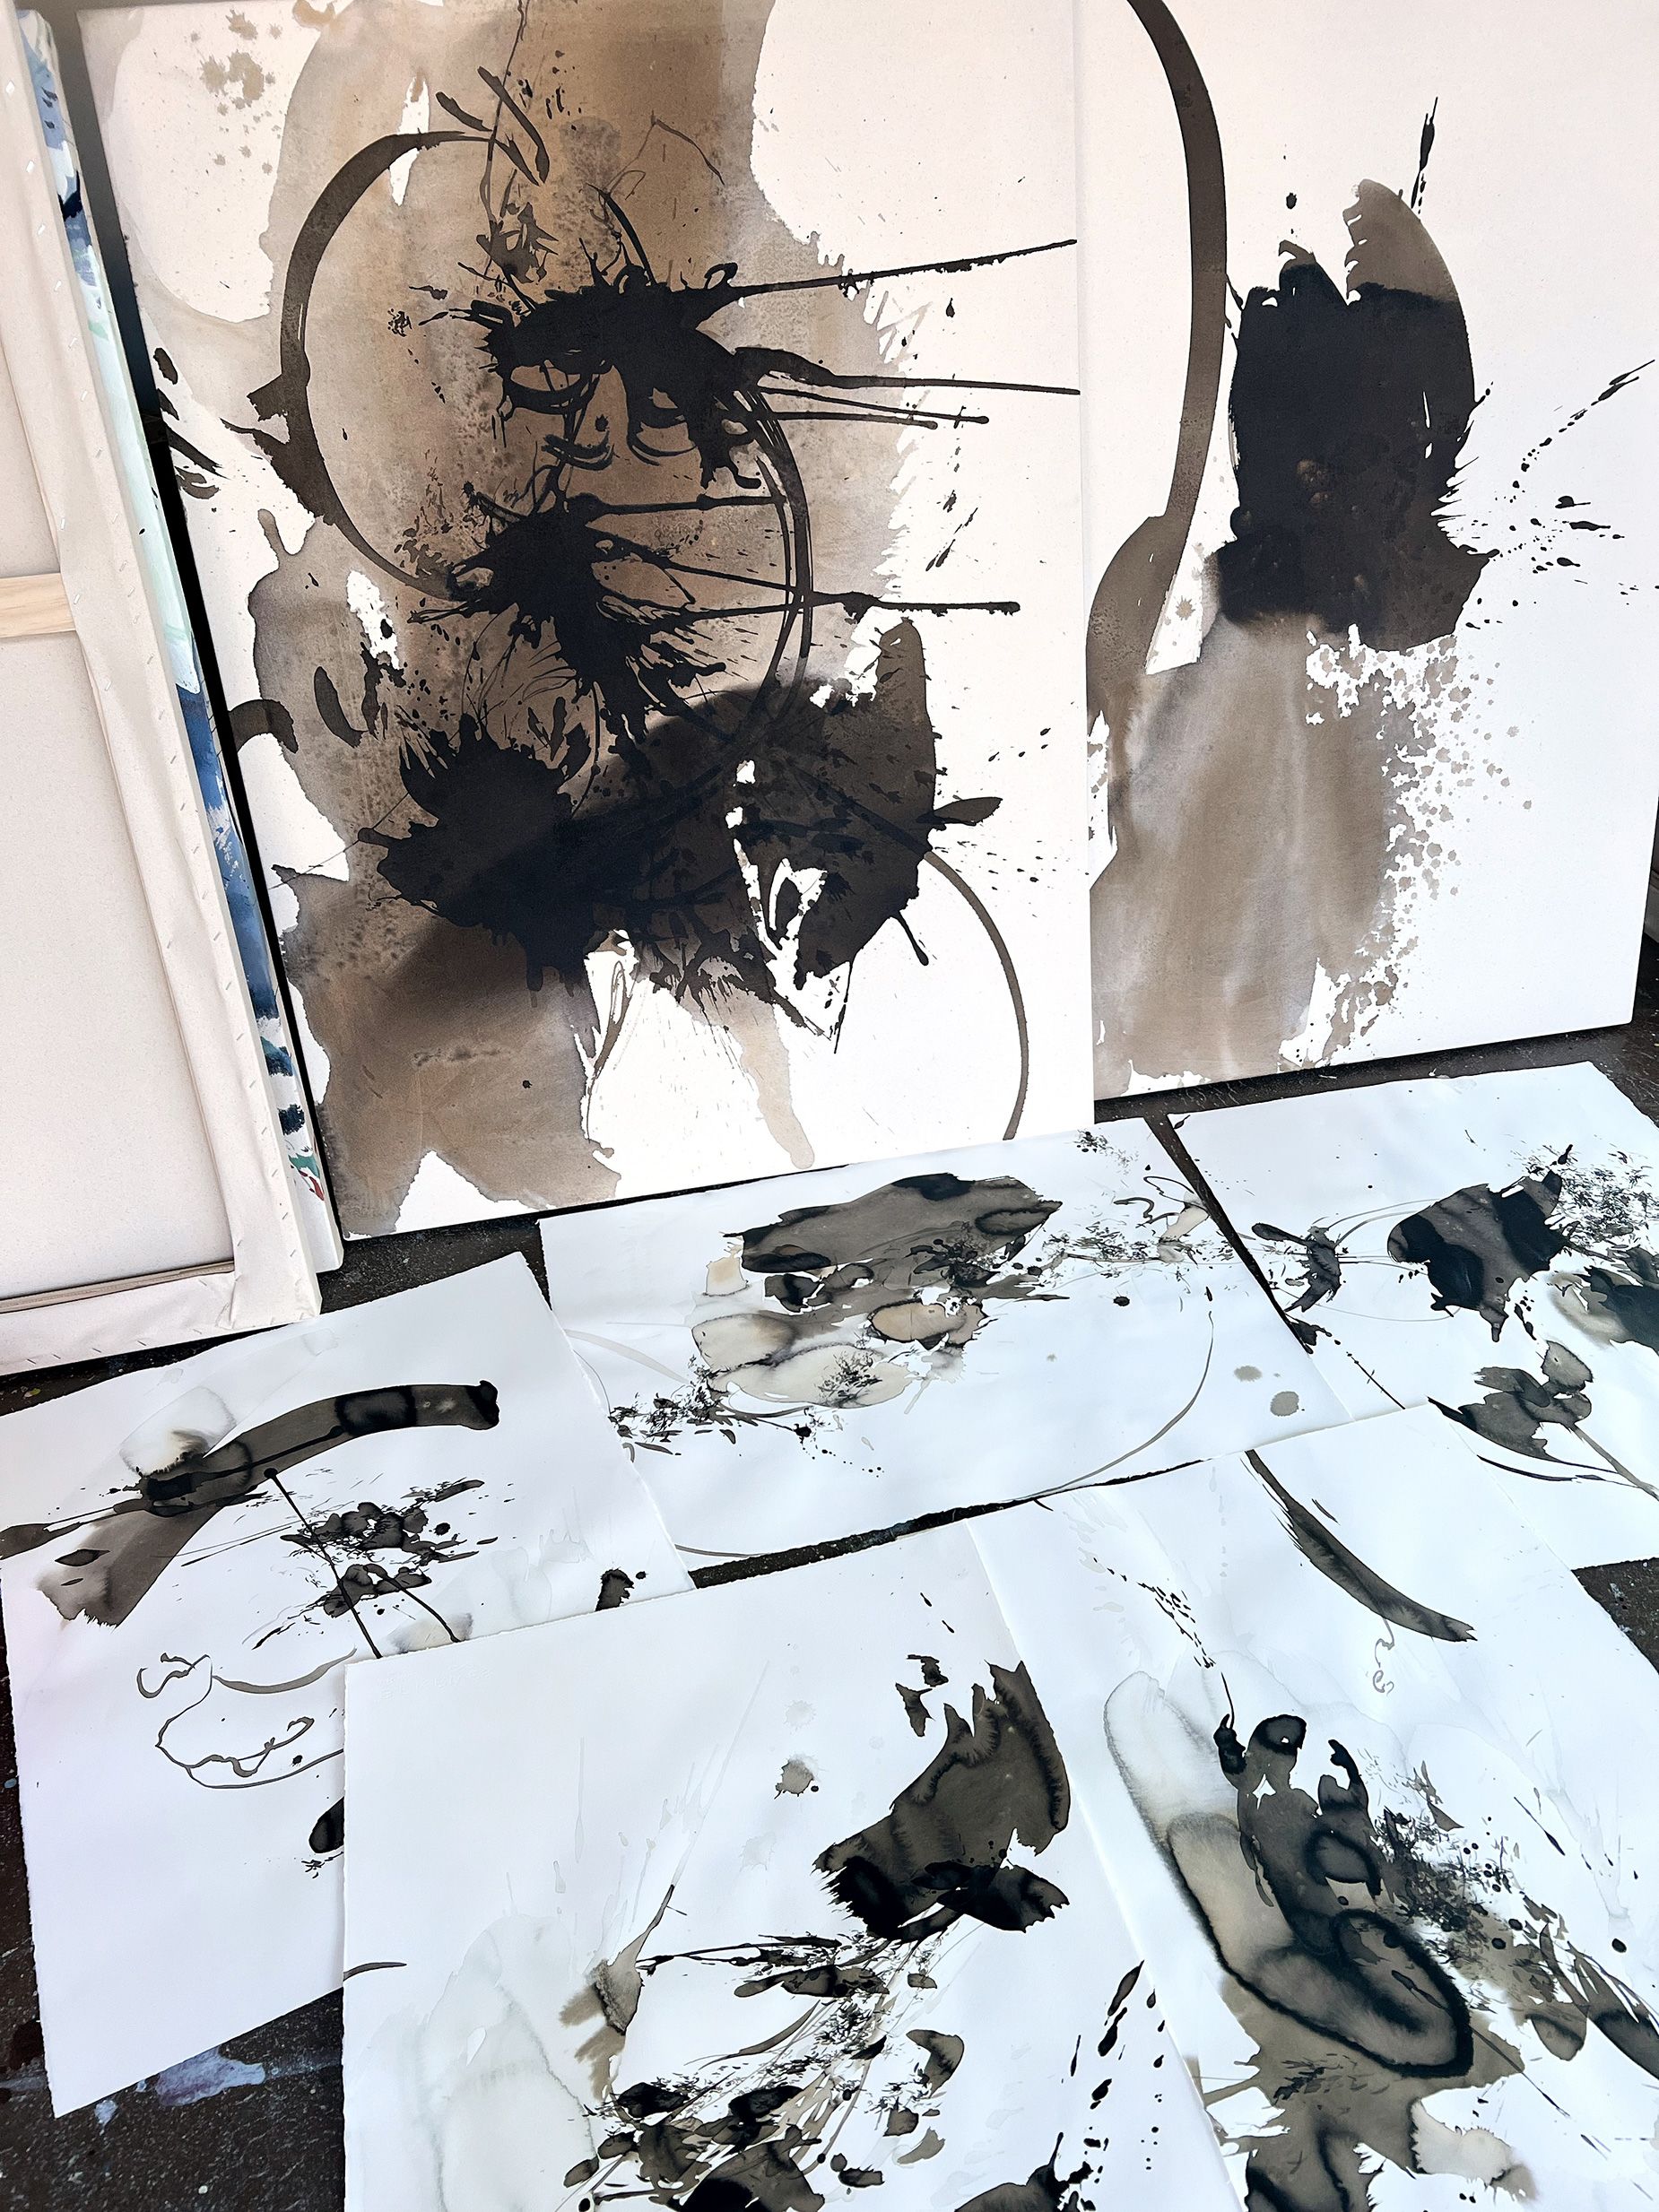 Kwan says she has anxiety over gun violence in the US, particularly after the birth of her child. With her practice based in calligraphic brushstrokes, she became interested in trying Little's inks.